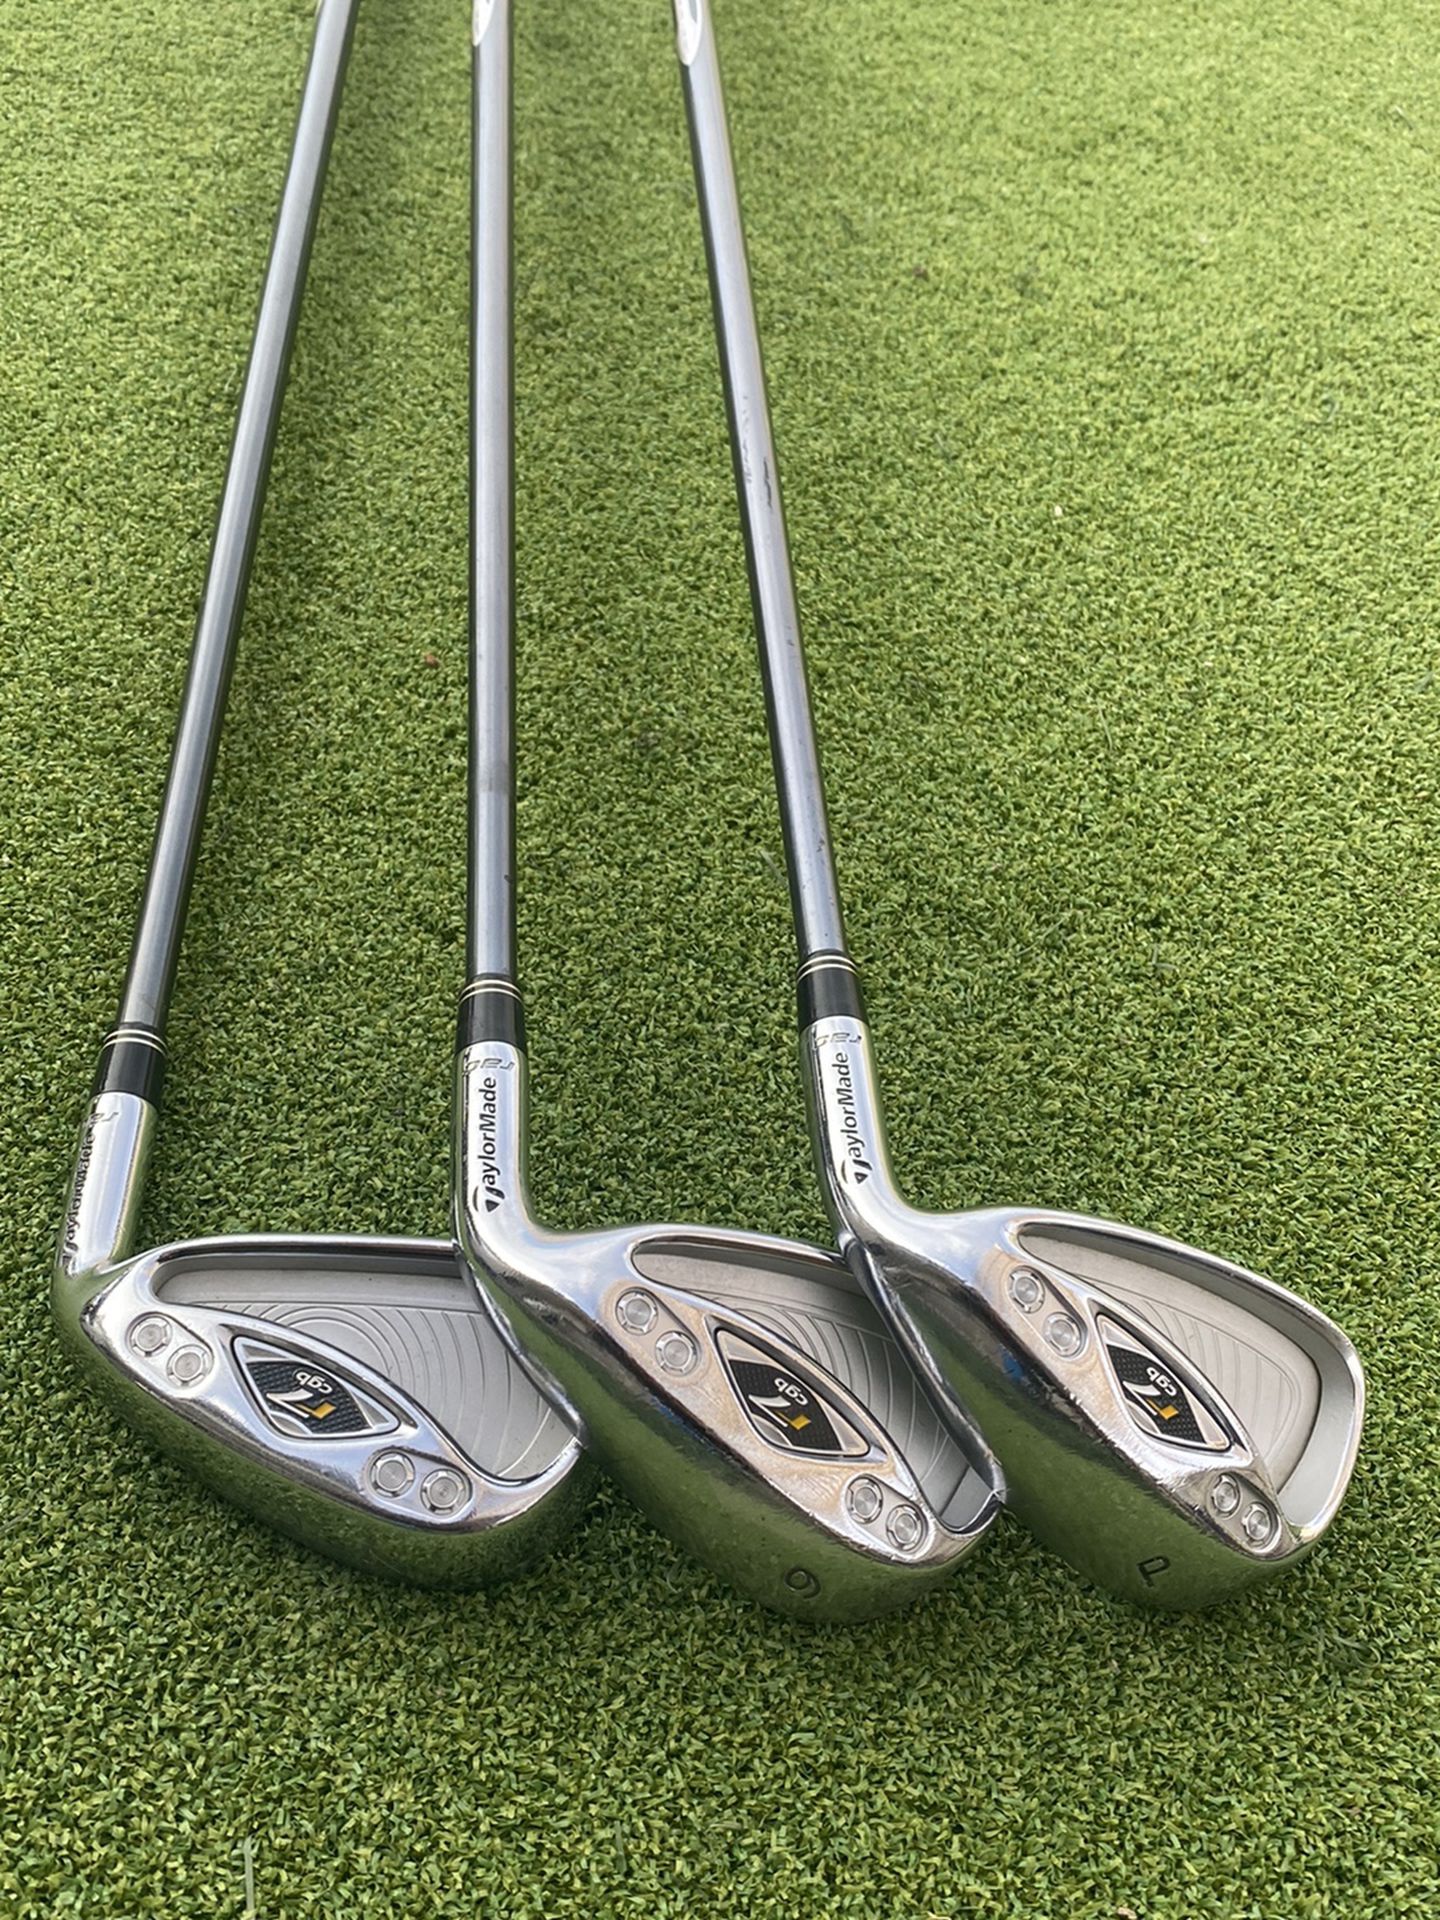 Taylormade R7 Irons